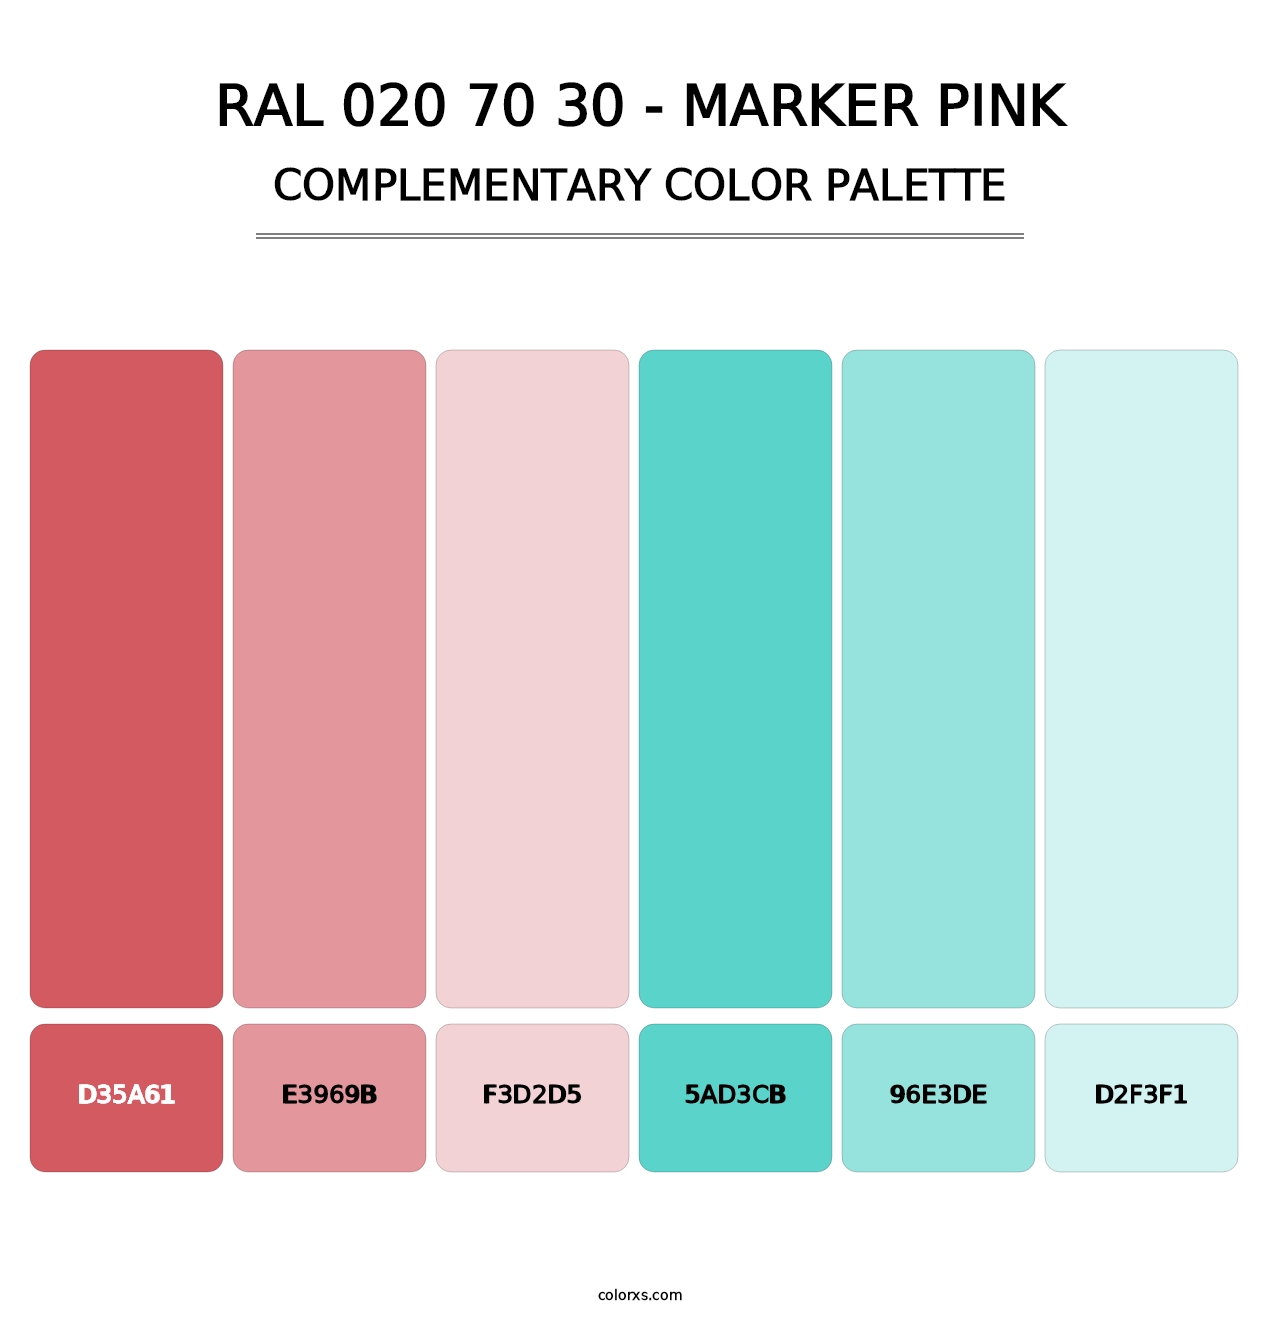 RAL 020 70 30 - Marker Pink - Complementary Color Palette